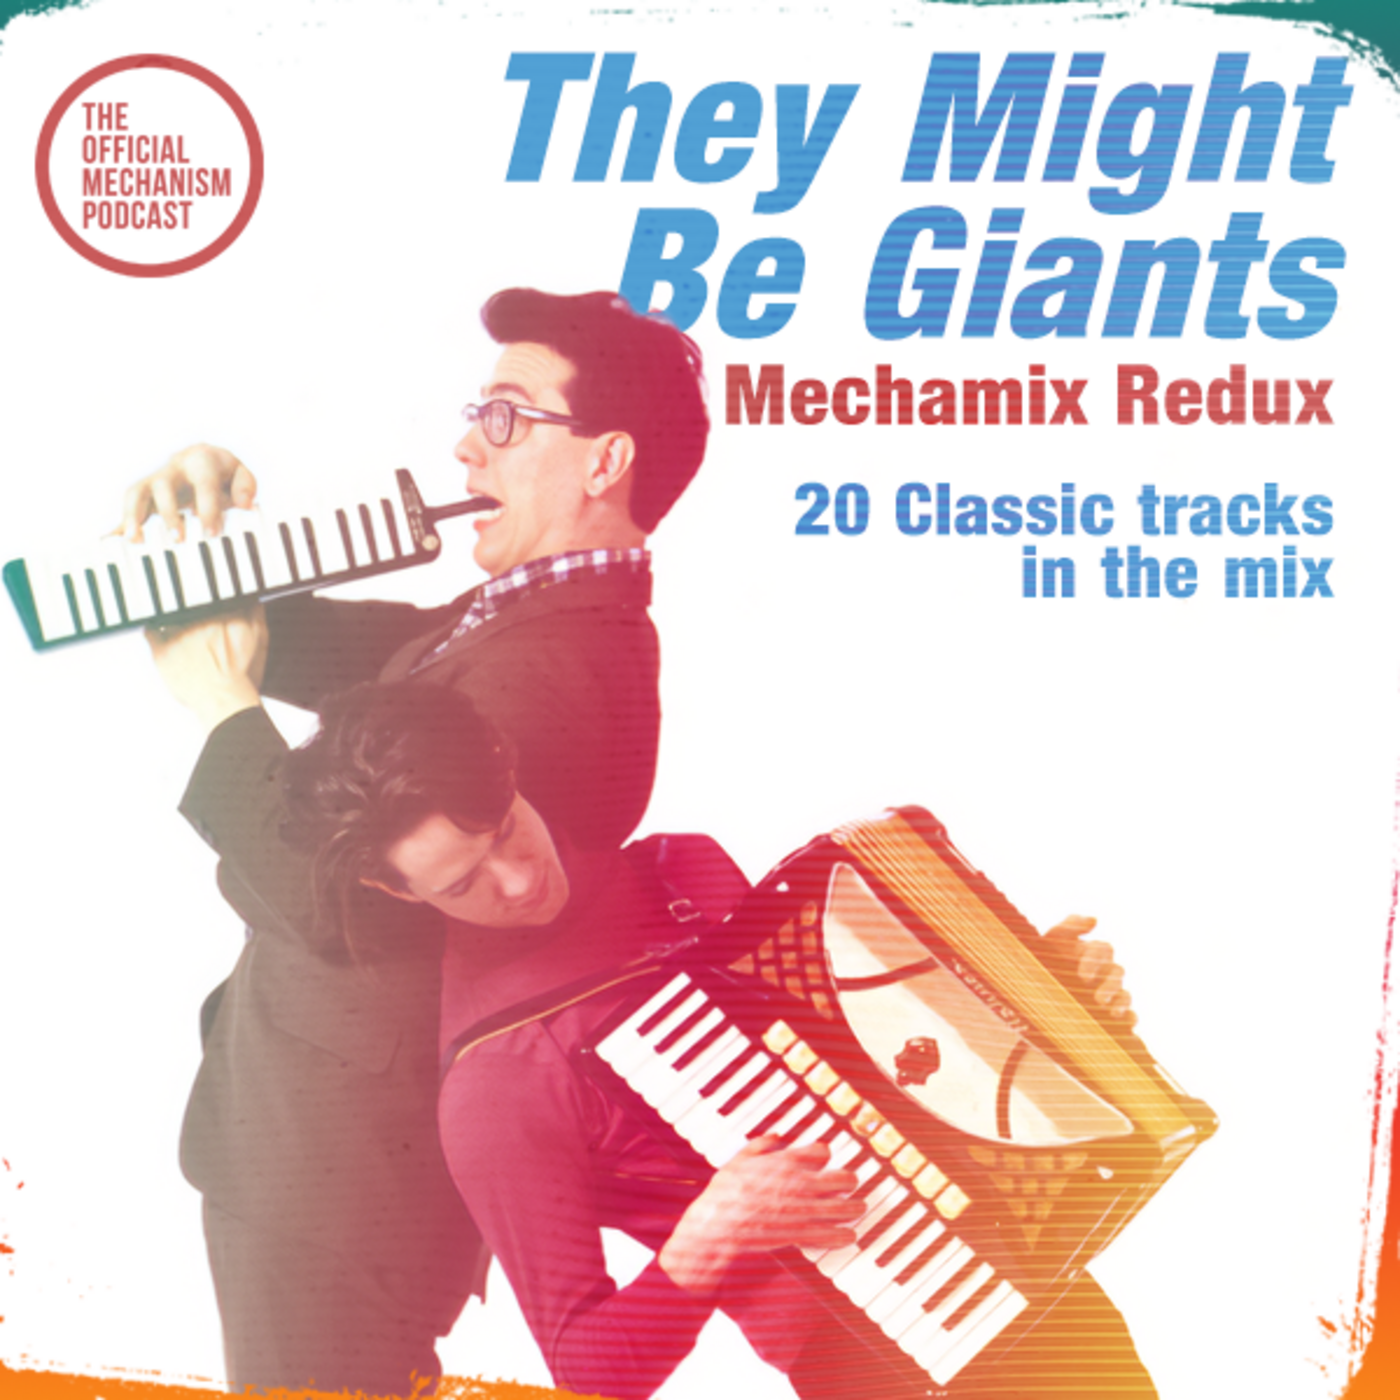 Episode 1117: THEY MIGHT BE GIANTS MECHAMIX REDUX